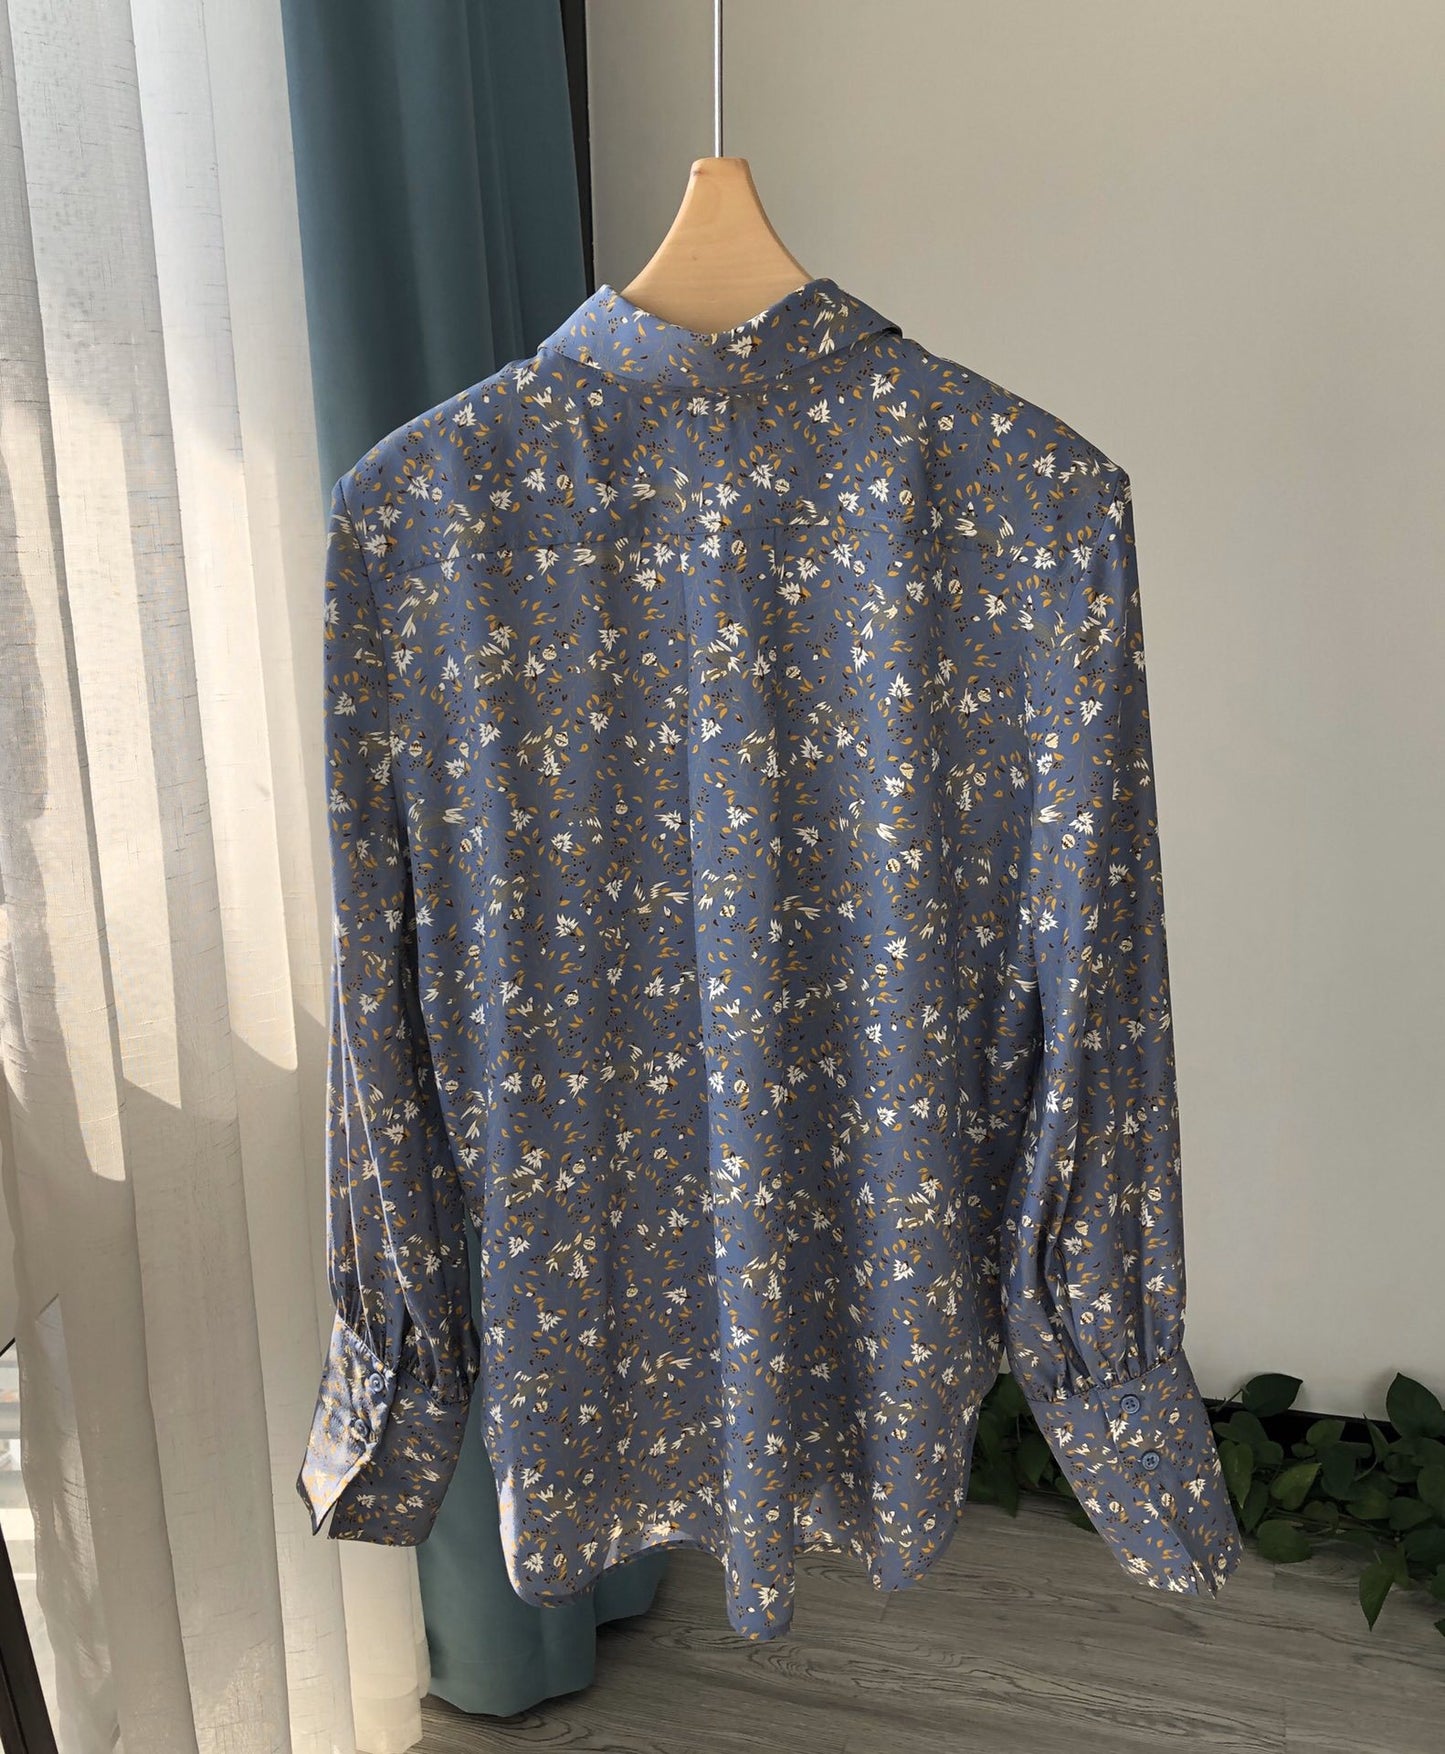 Fresh and Elegant Flower and Bird Print Heavy Satin Silk Long-Sleeved Shirt with in Gray-Blue Tone